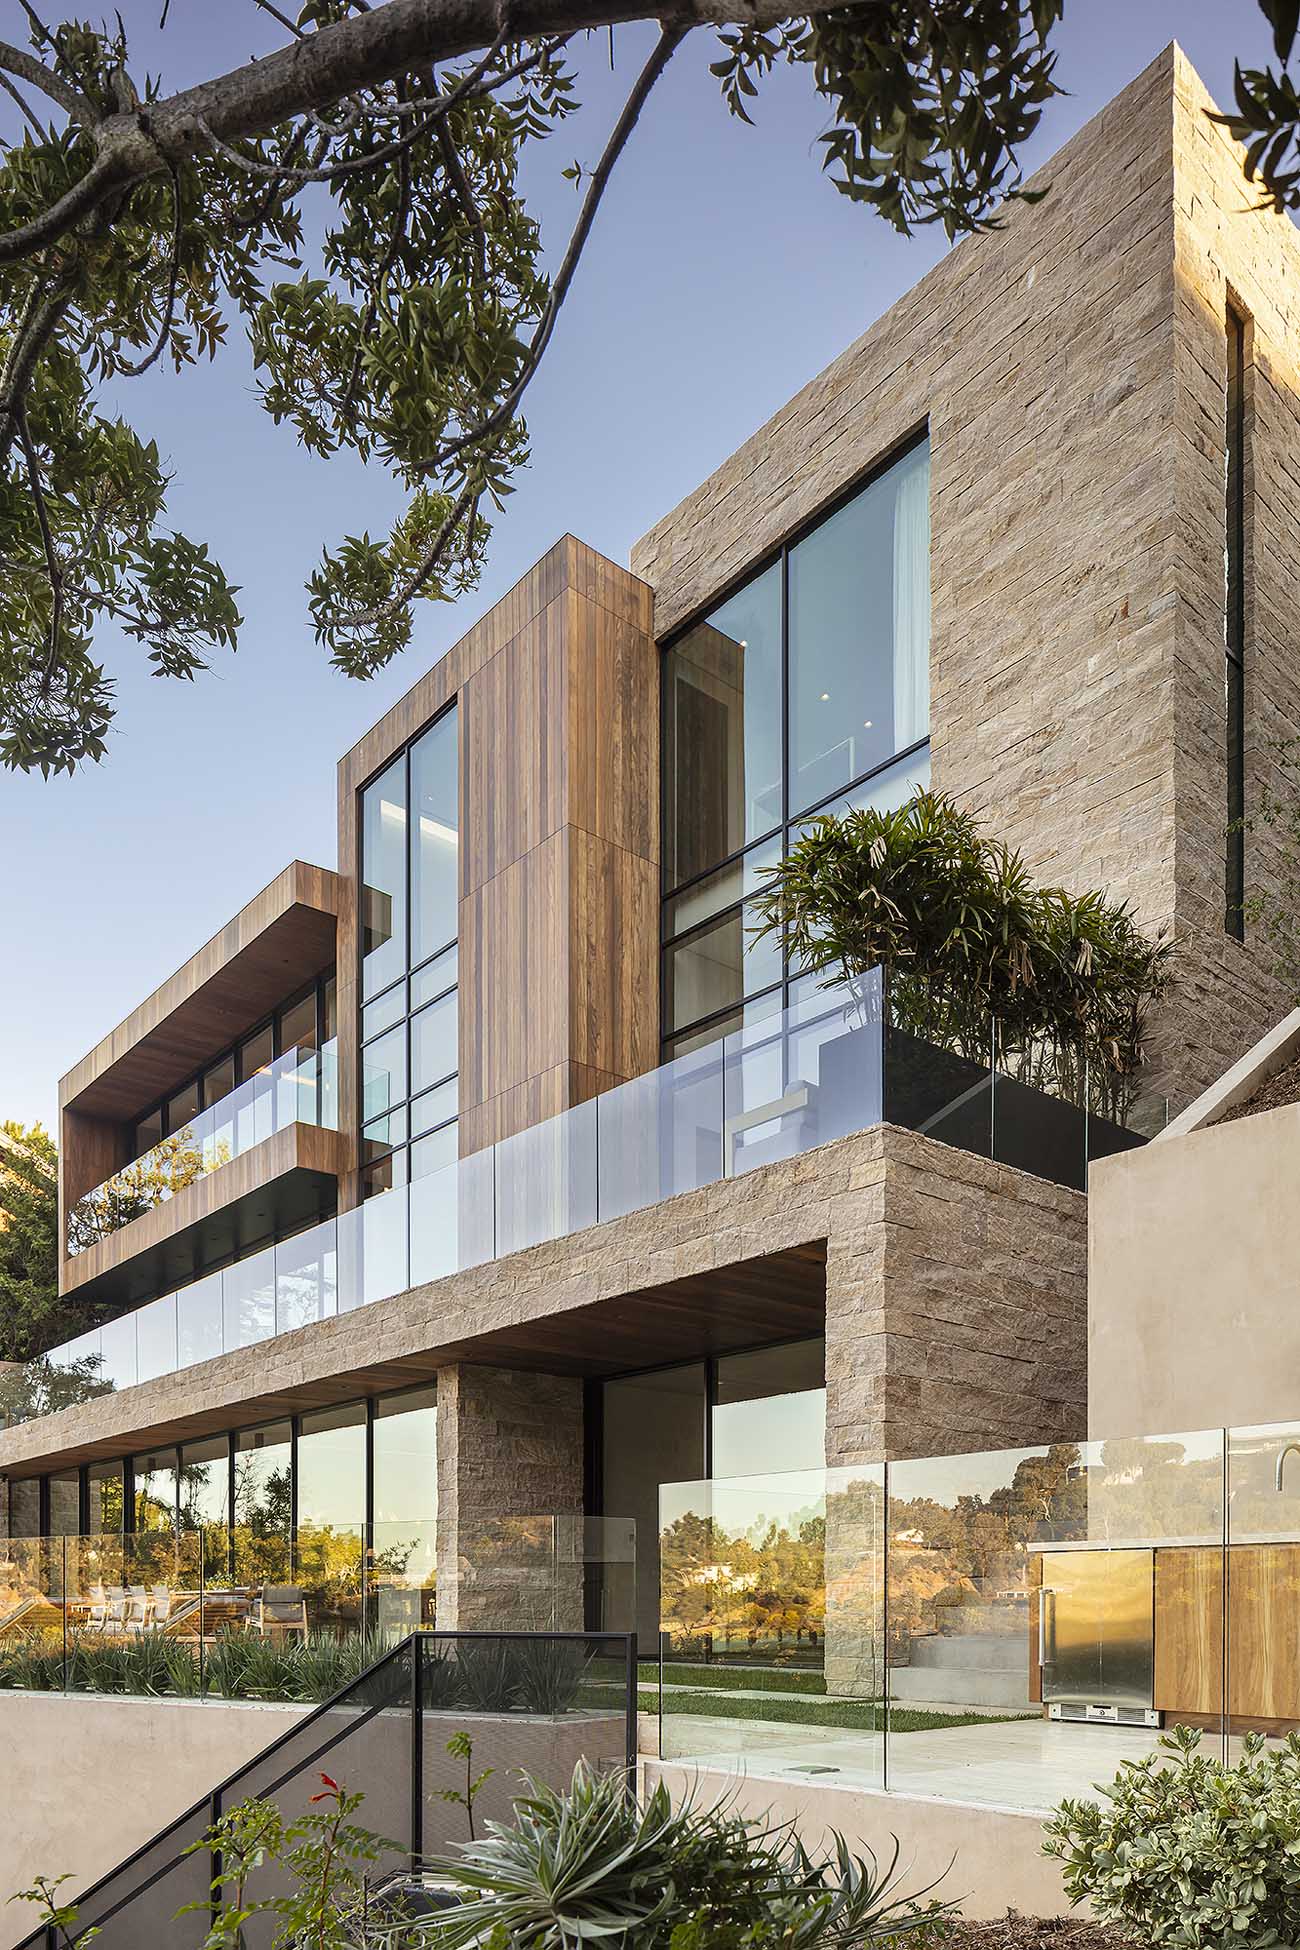 A modern house with multiple levels is clad in limestone, wood, and glass.